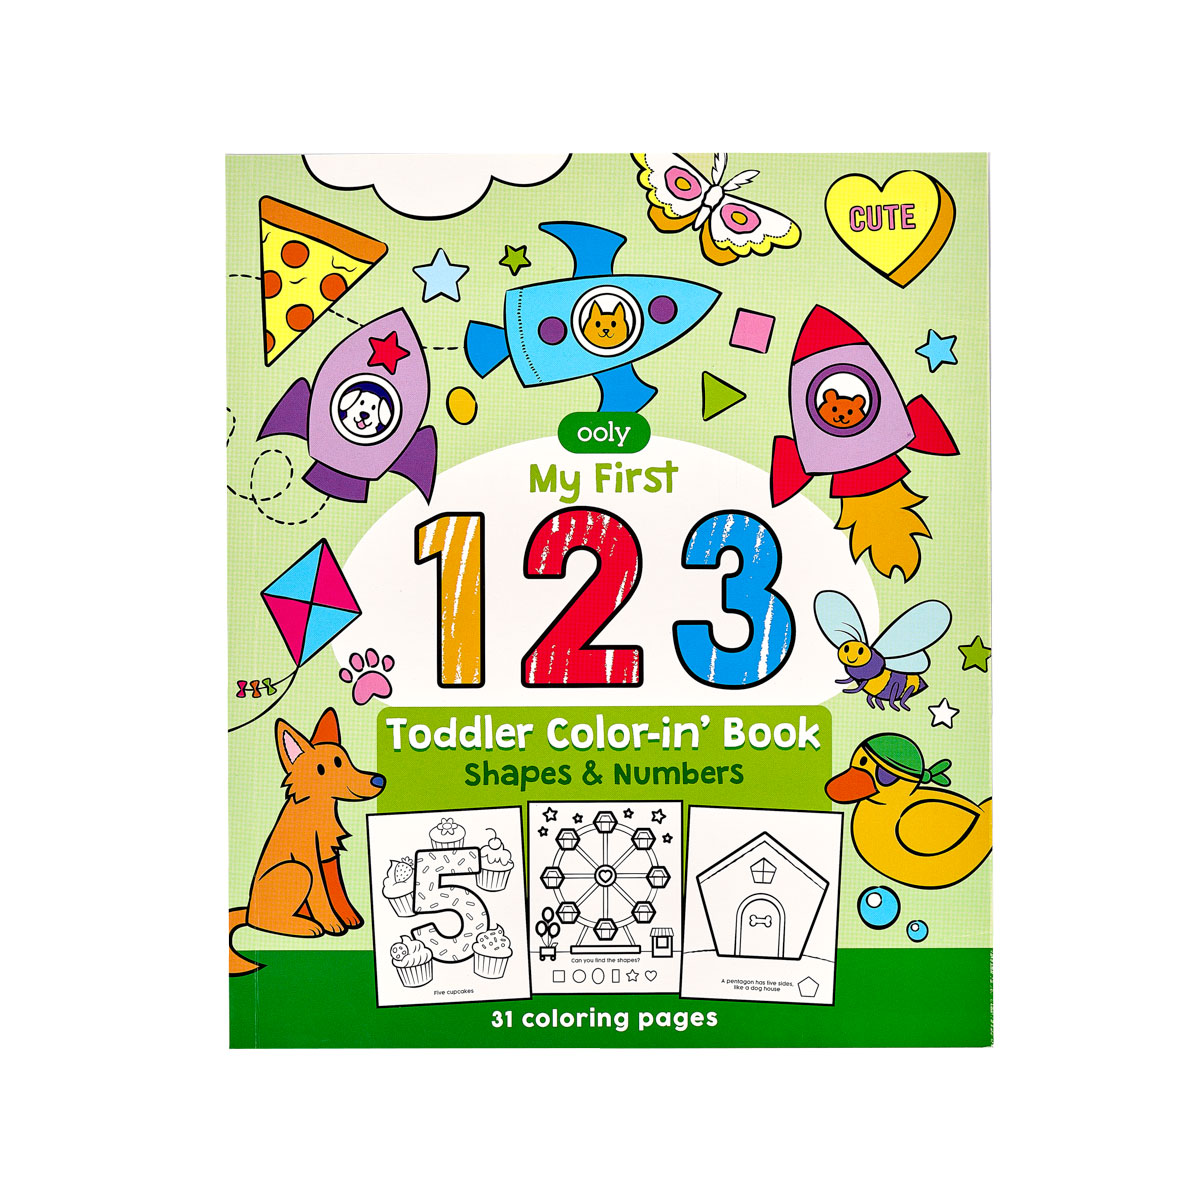 ooly Toddler My First Color-in’ Book 123 Shapes & Numbers